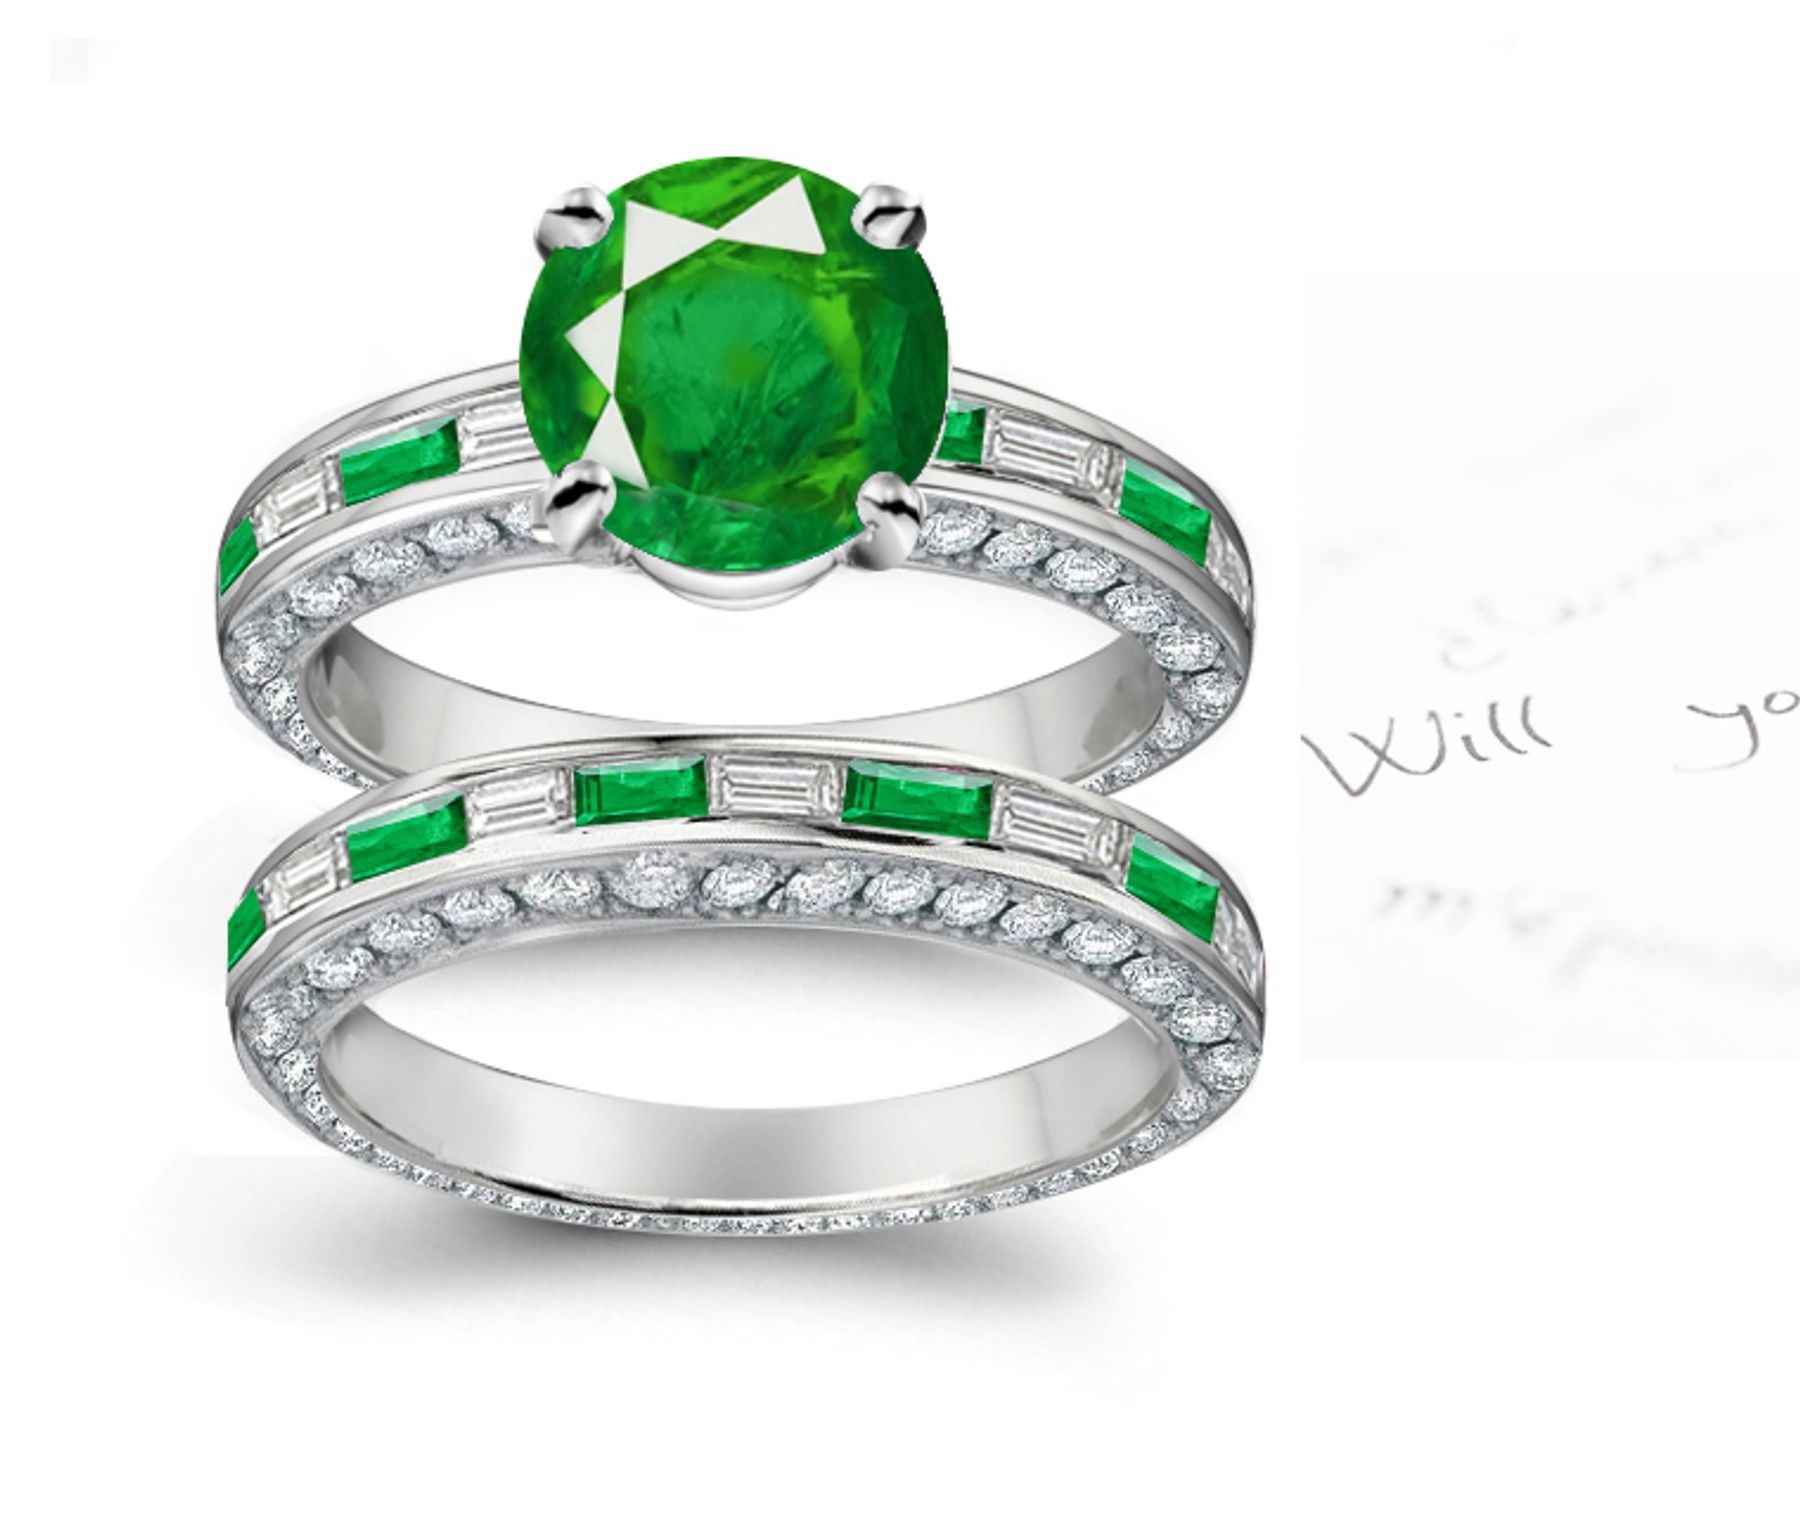 Especially Unique and as Distinctive: Channel Set Emerald & Diamond Women's Ring in 14k White Gold & Platinum